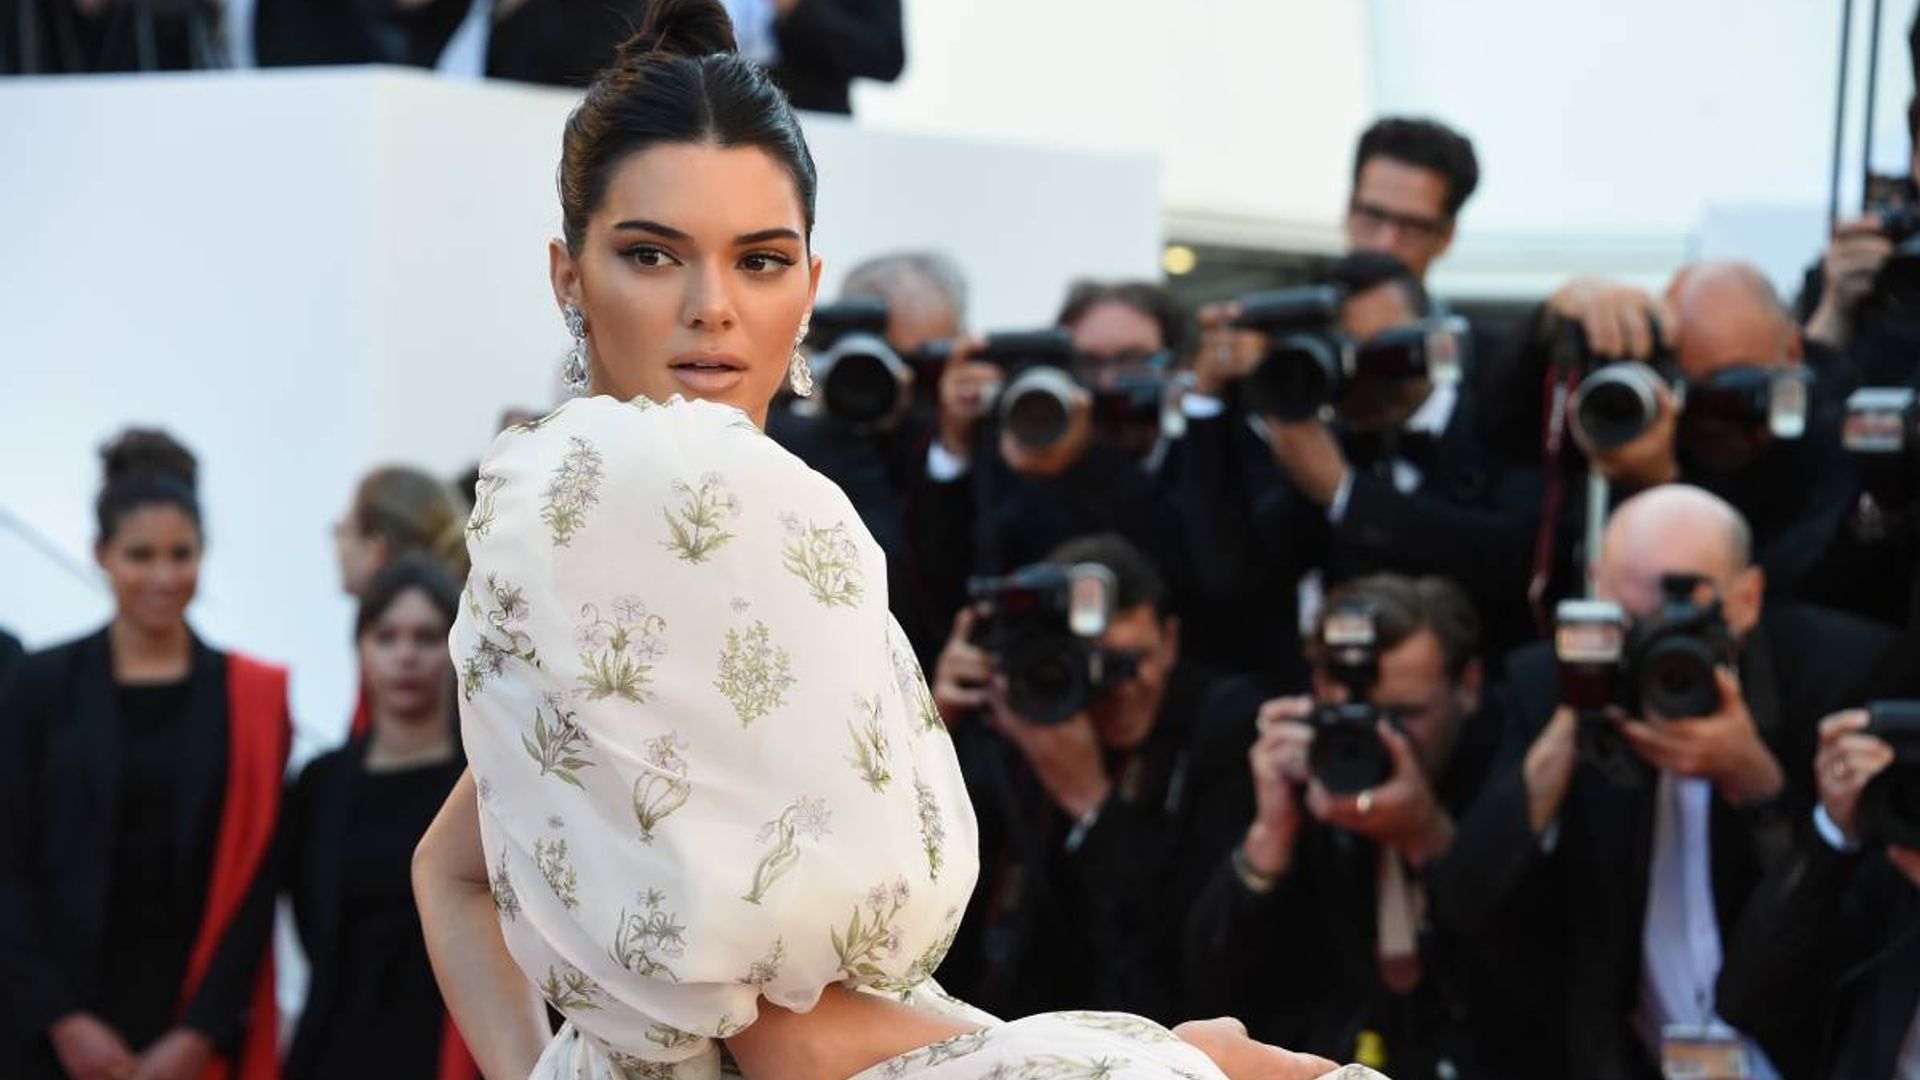 Kendall Jenner's latest look might surprise you